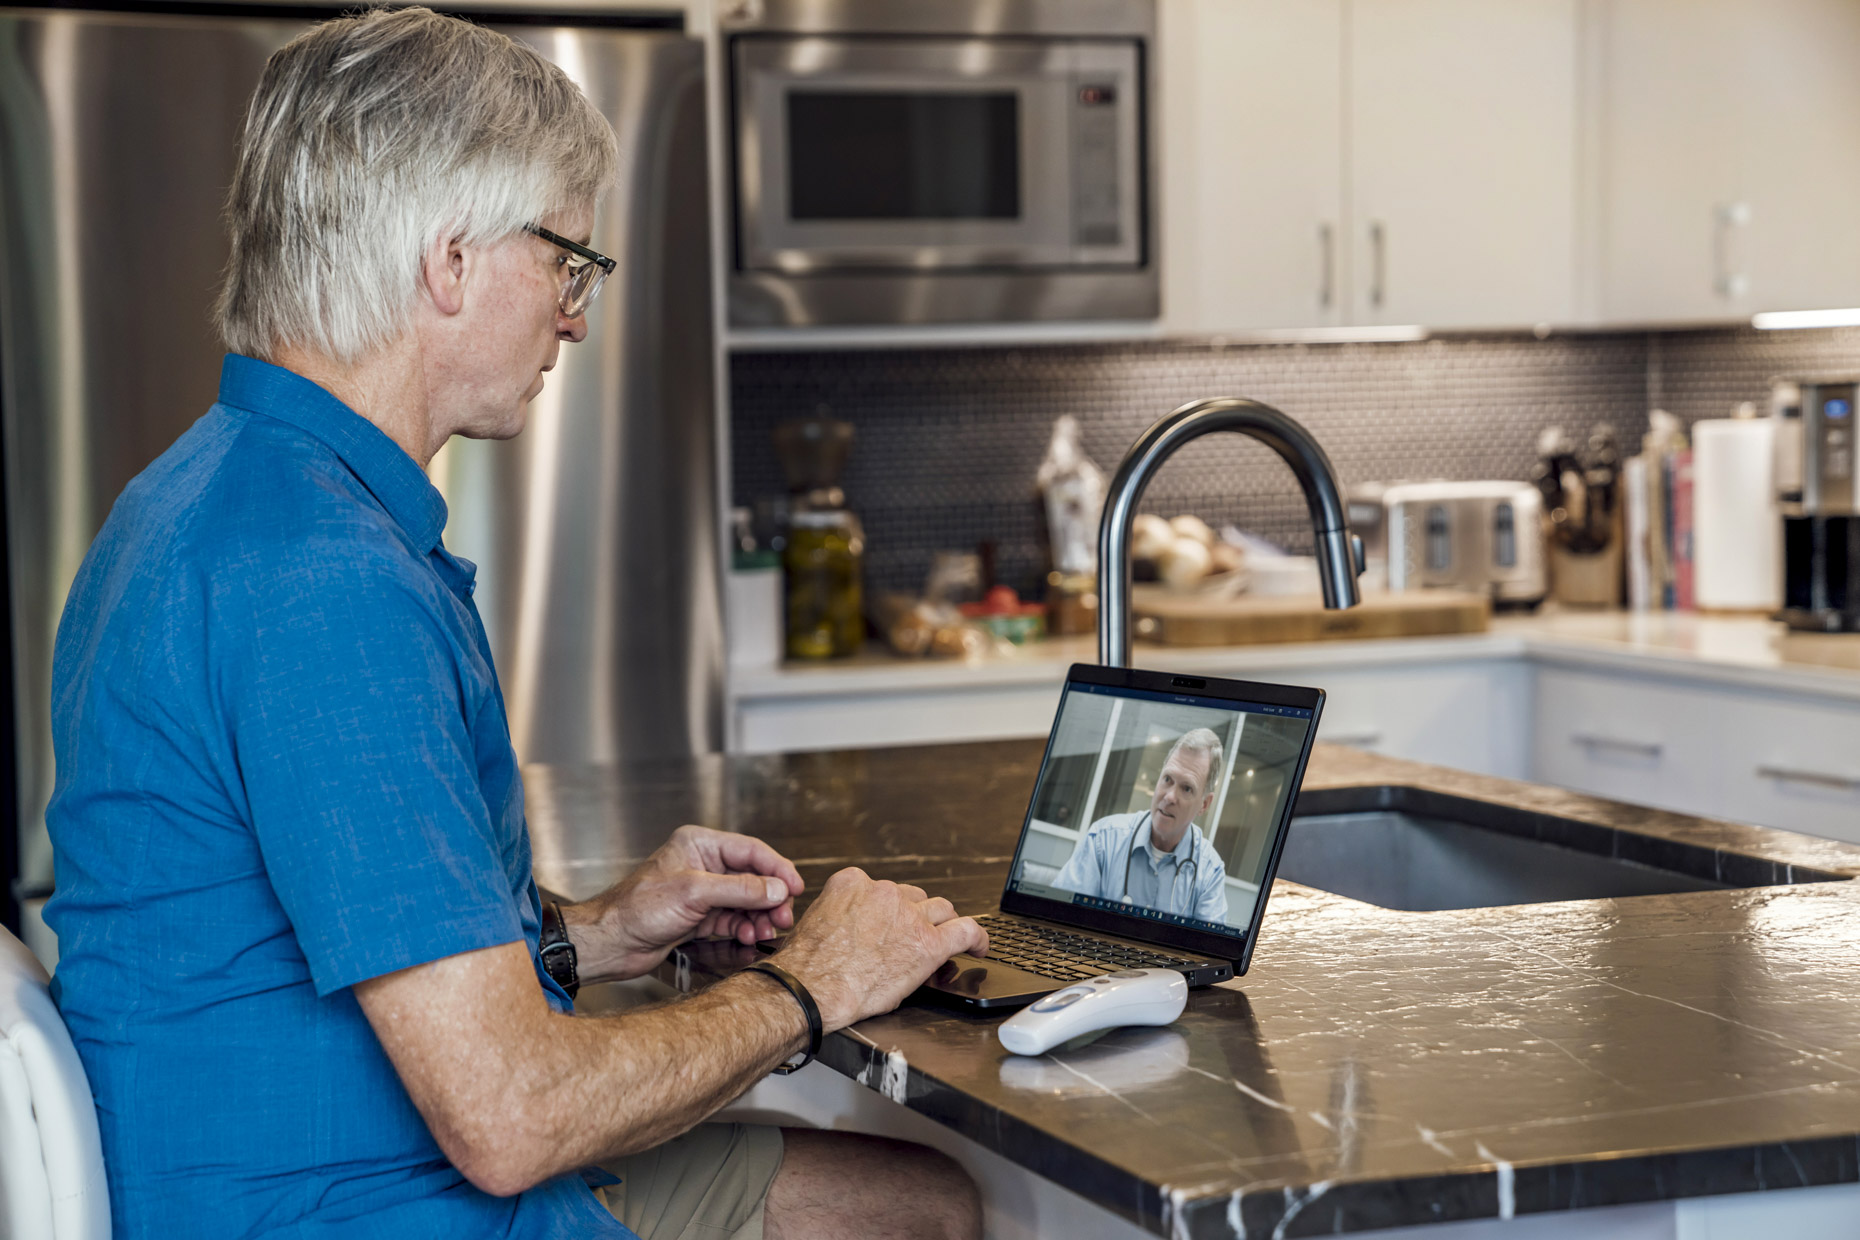 Senior man video chatting with doctor on laptop computer in kitchen